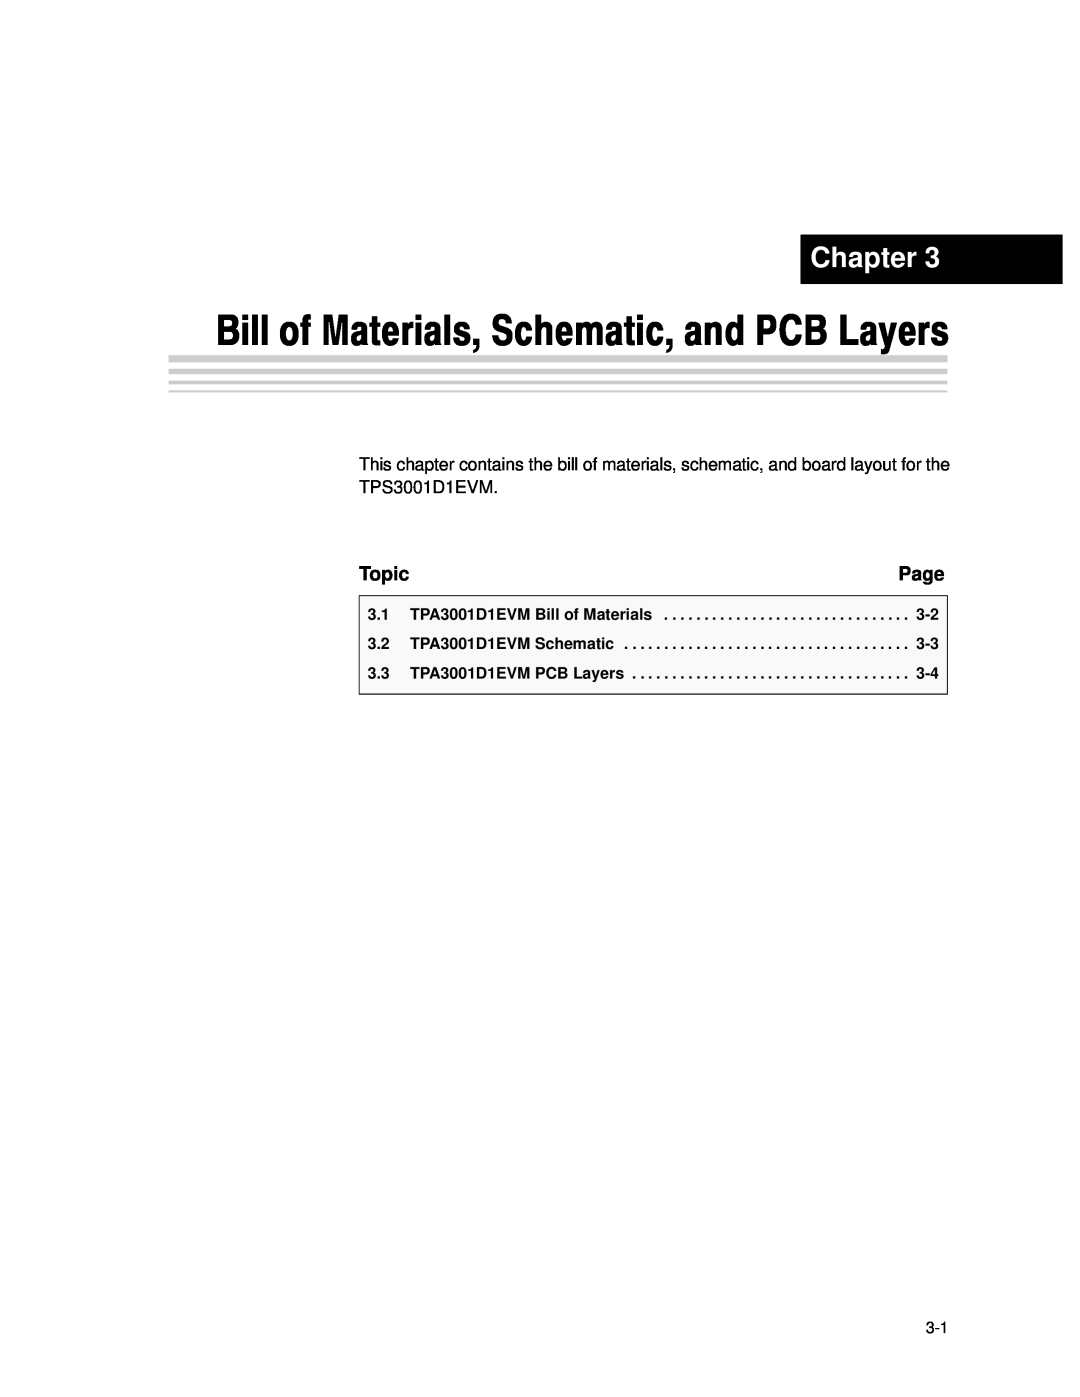 Texas Instruments manual Bill of Materials, Schematic, and PCB Layers, Chapter, Page, Topic, TPA3001D1EVM Schematic 